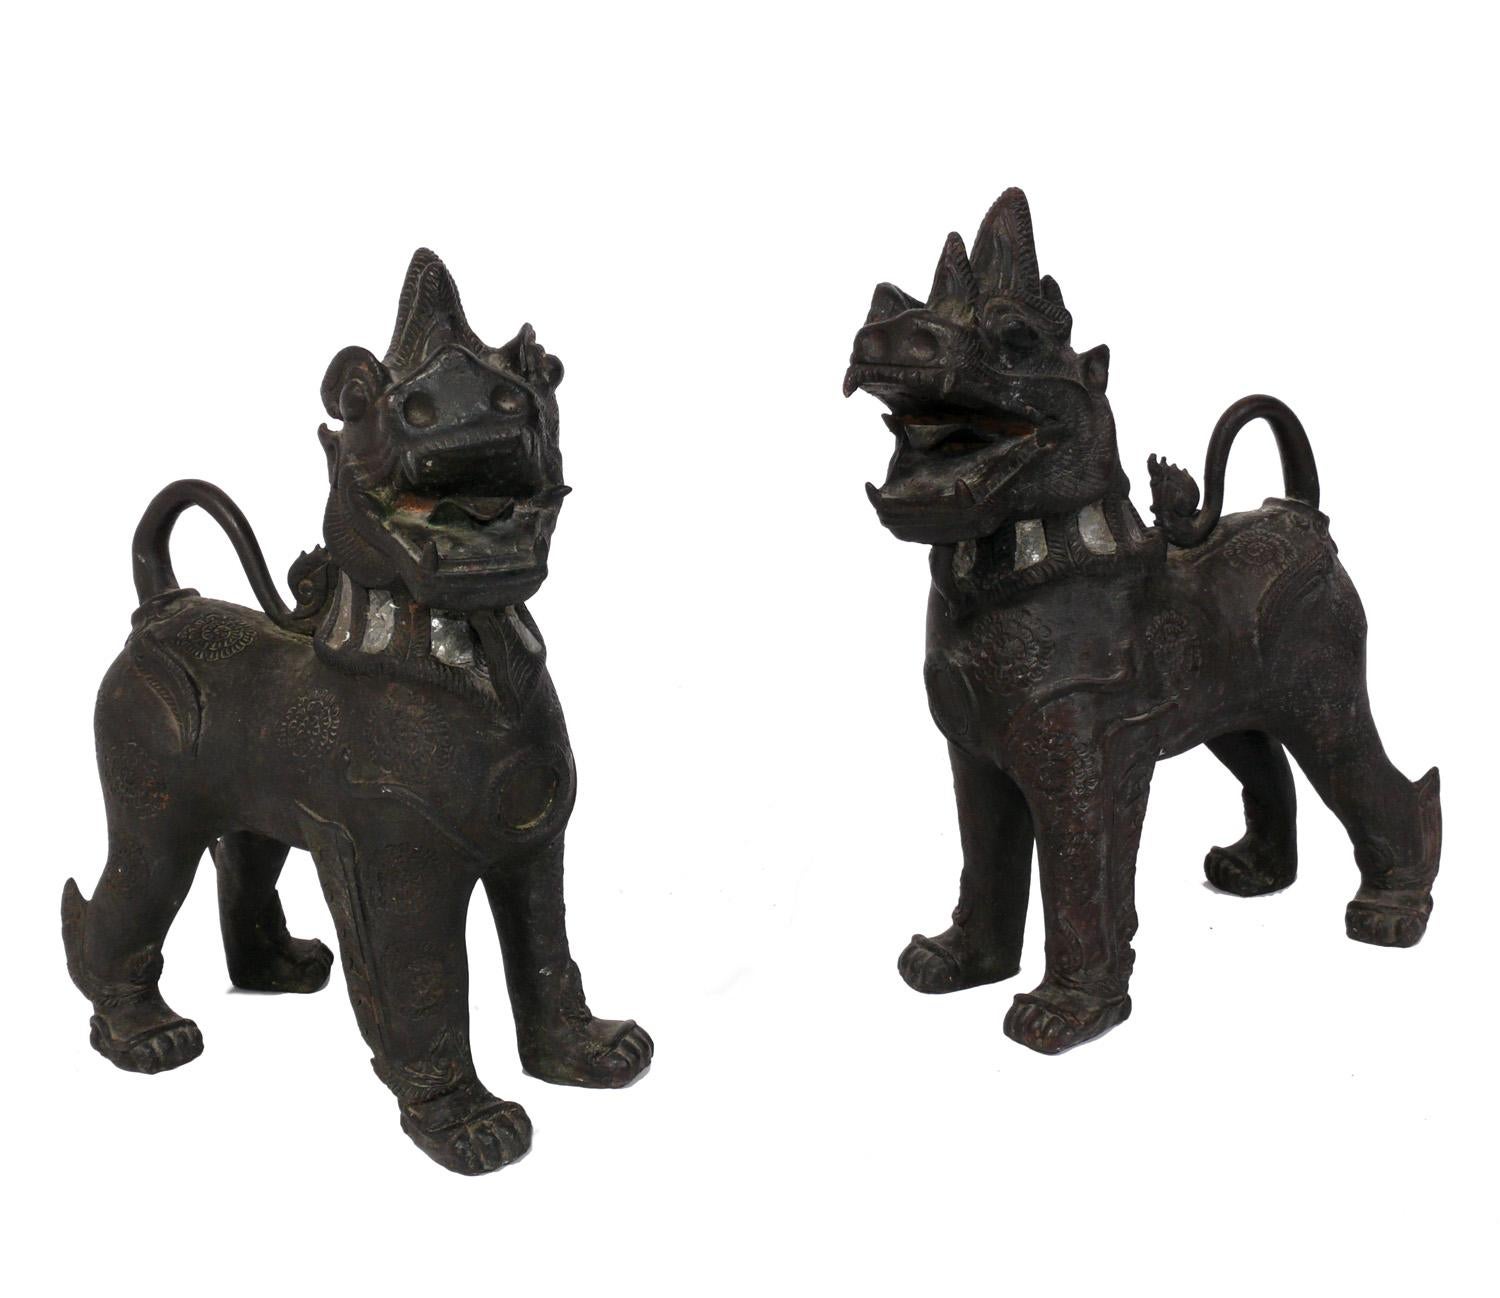 Pair of Asian Bronze and Inlaid Glass Foo Dogs or Kylin Dragon, probably Chinese, circa 1950s or earlier. They retain their warm original patina. These were purchased from the Manhattan estate of a Japanese American that traveled extensively through